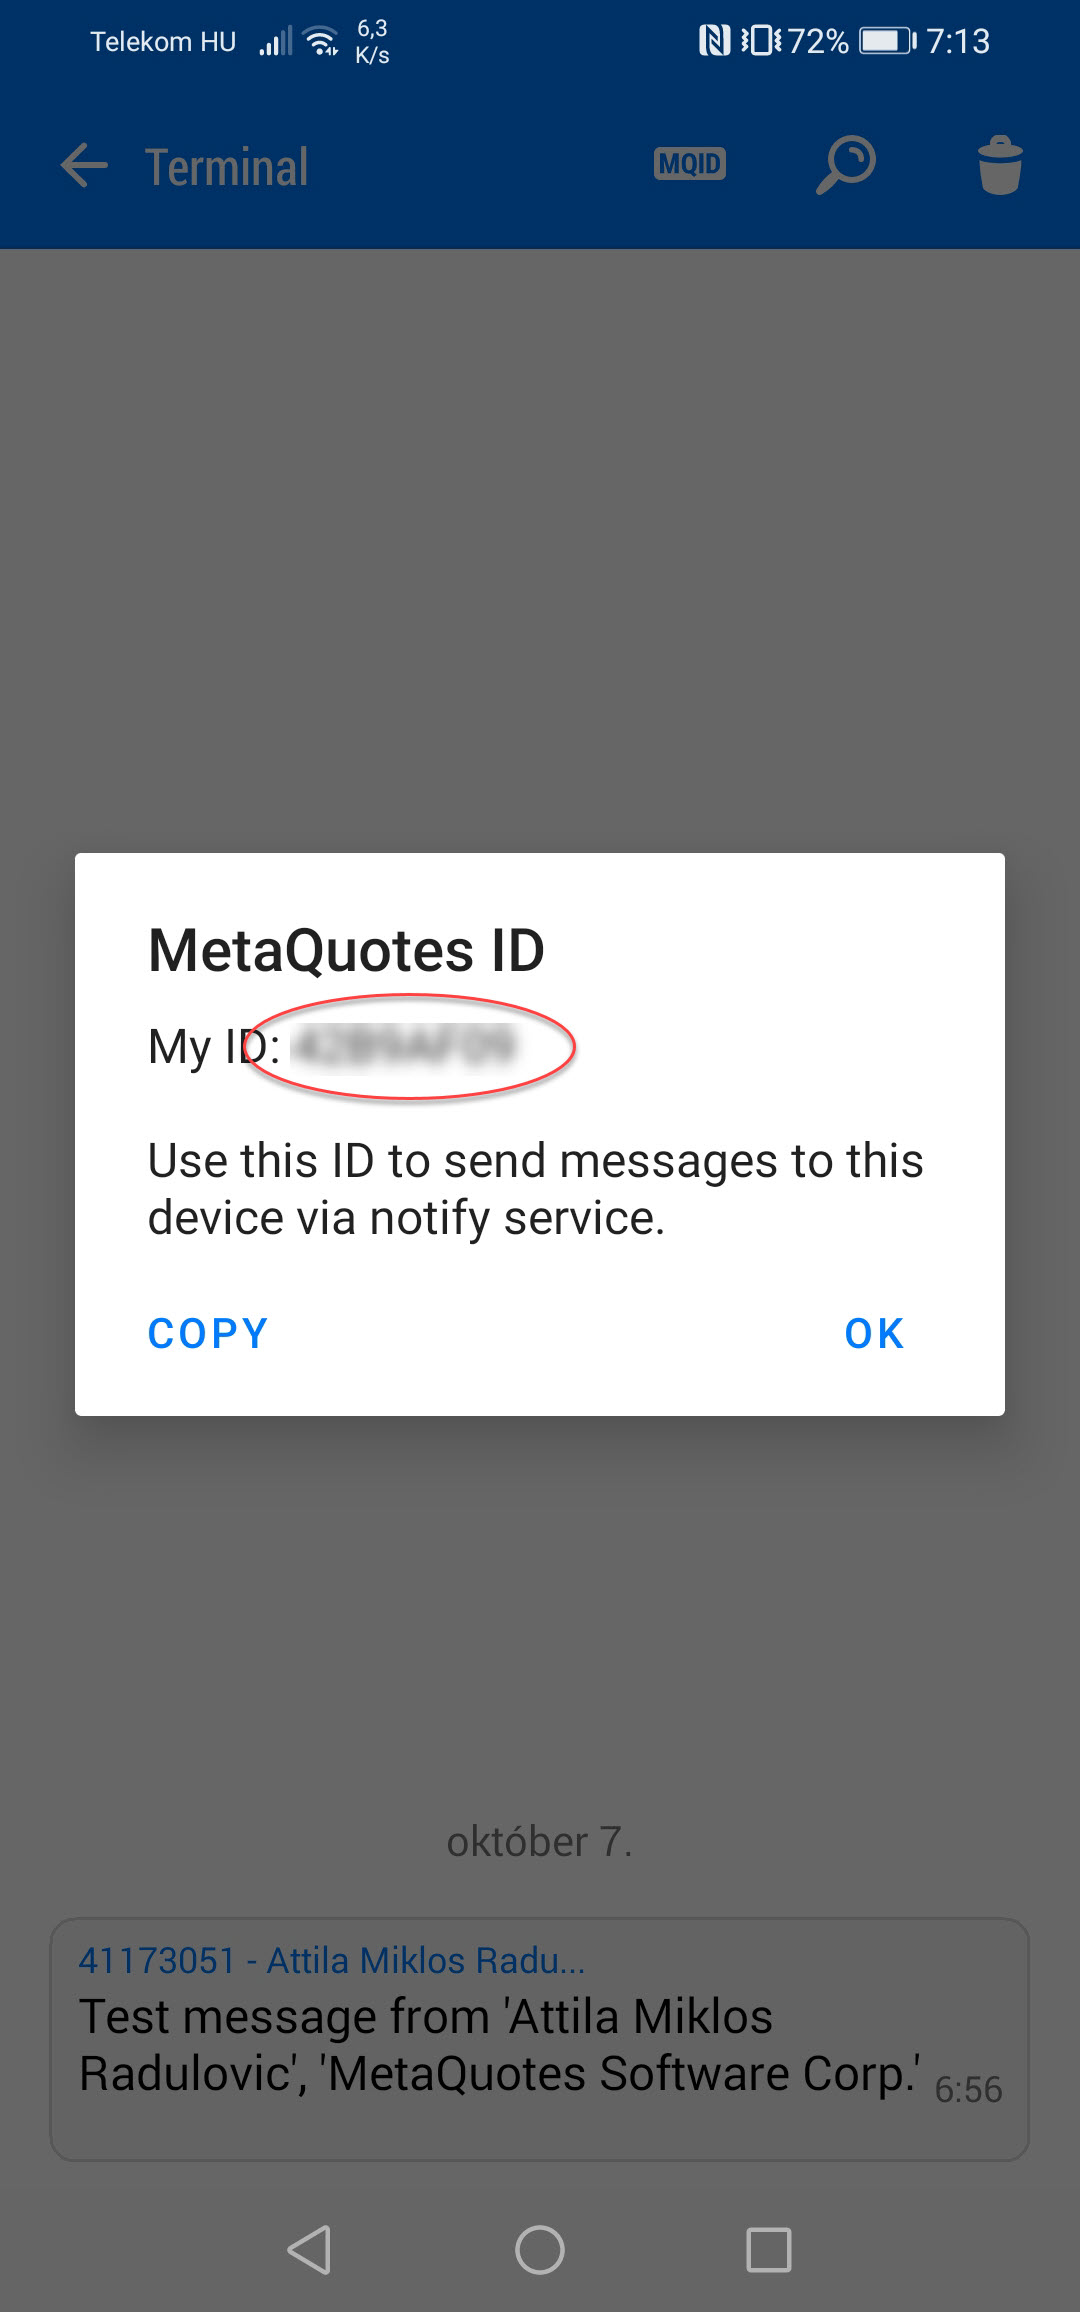 A MetaQuotes ID